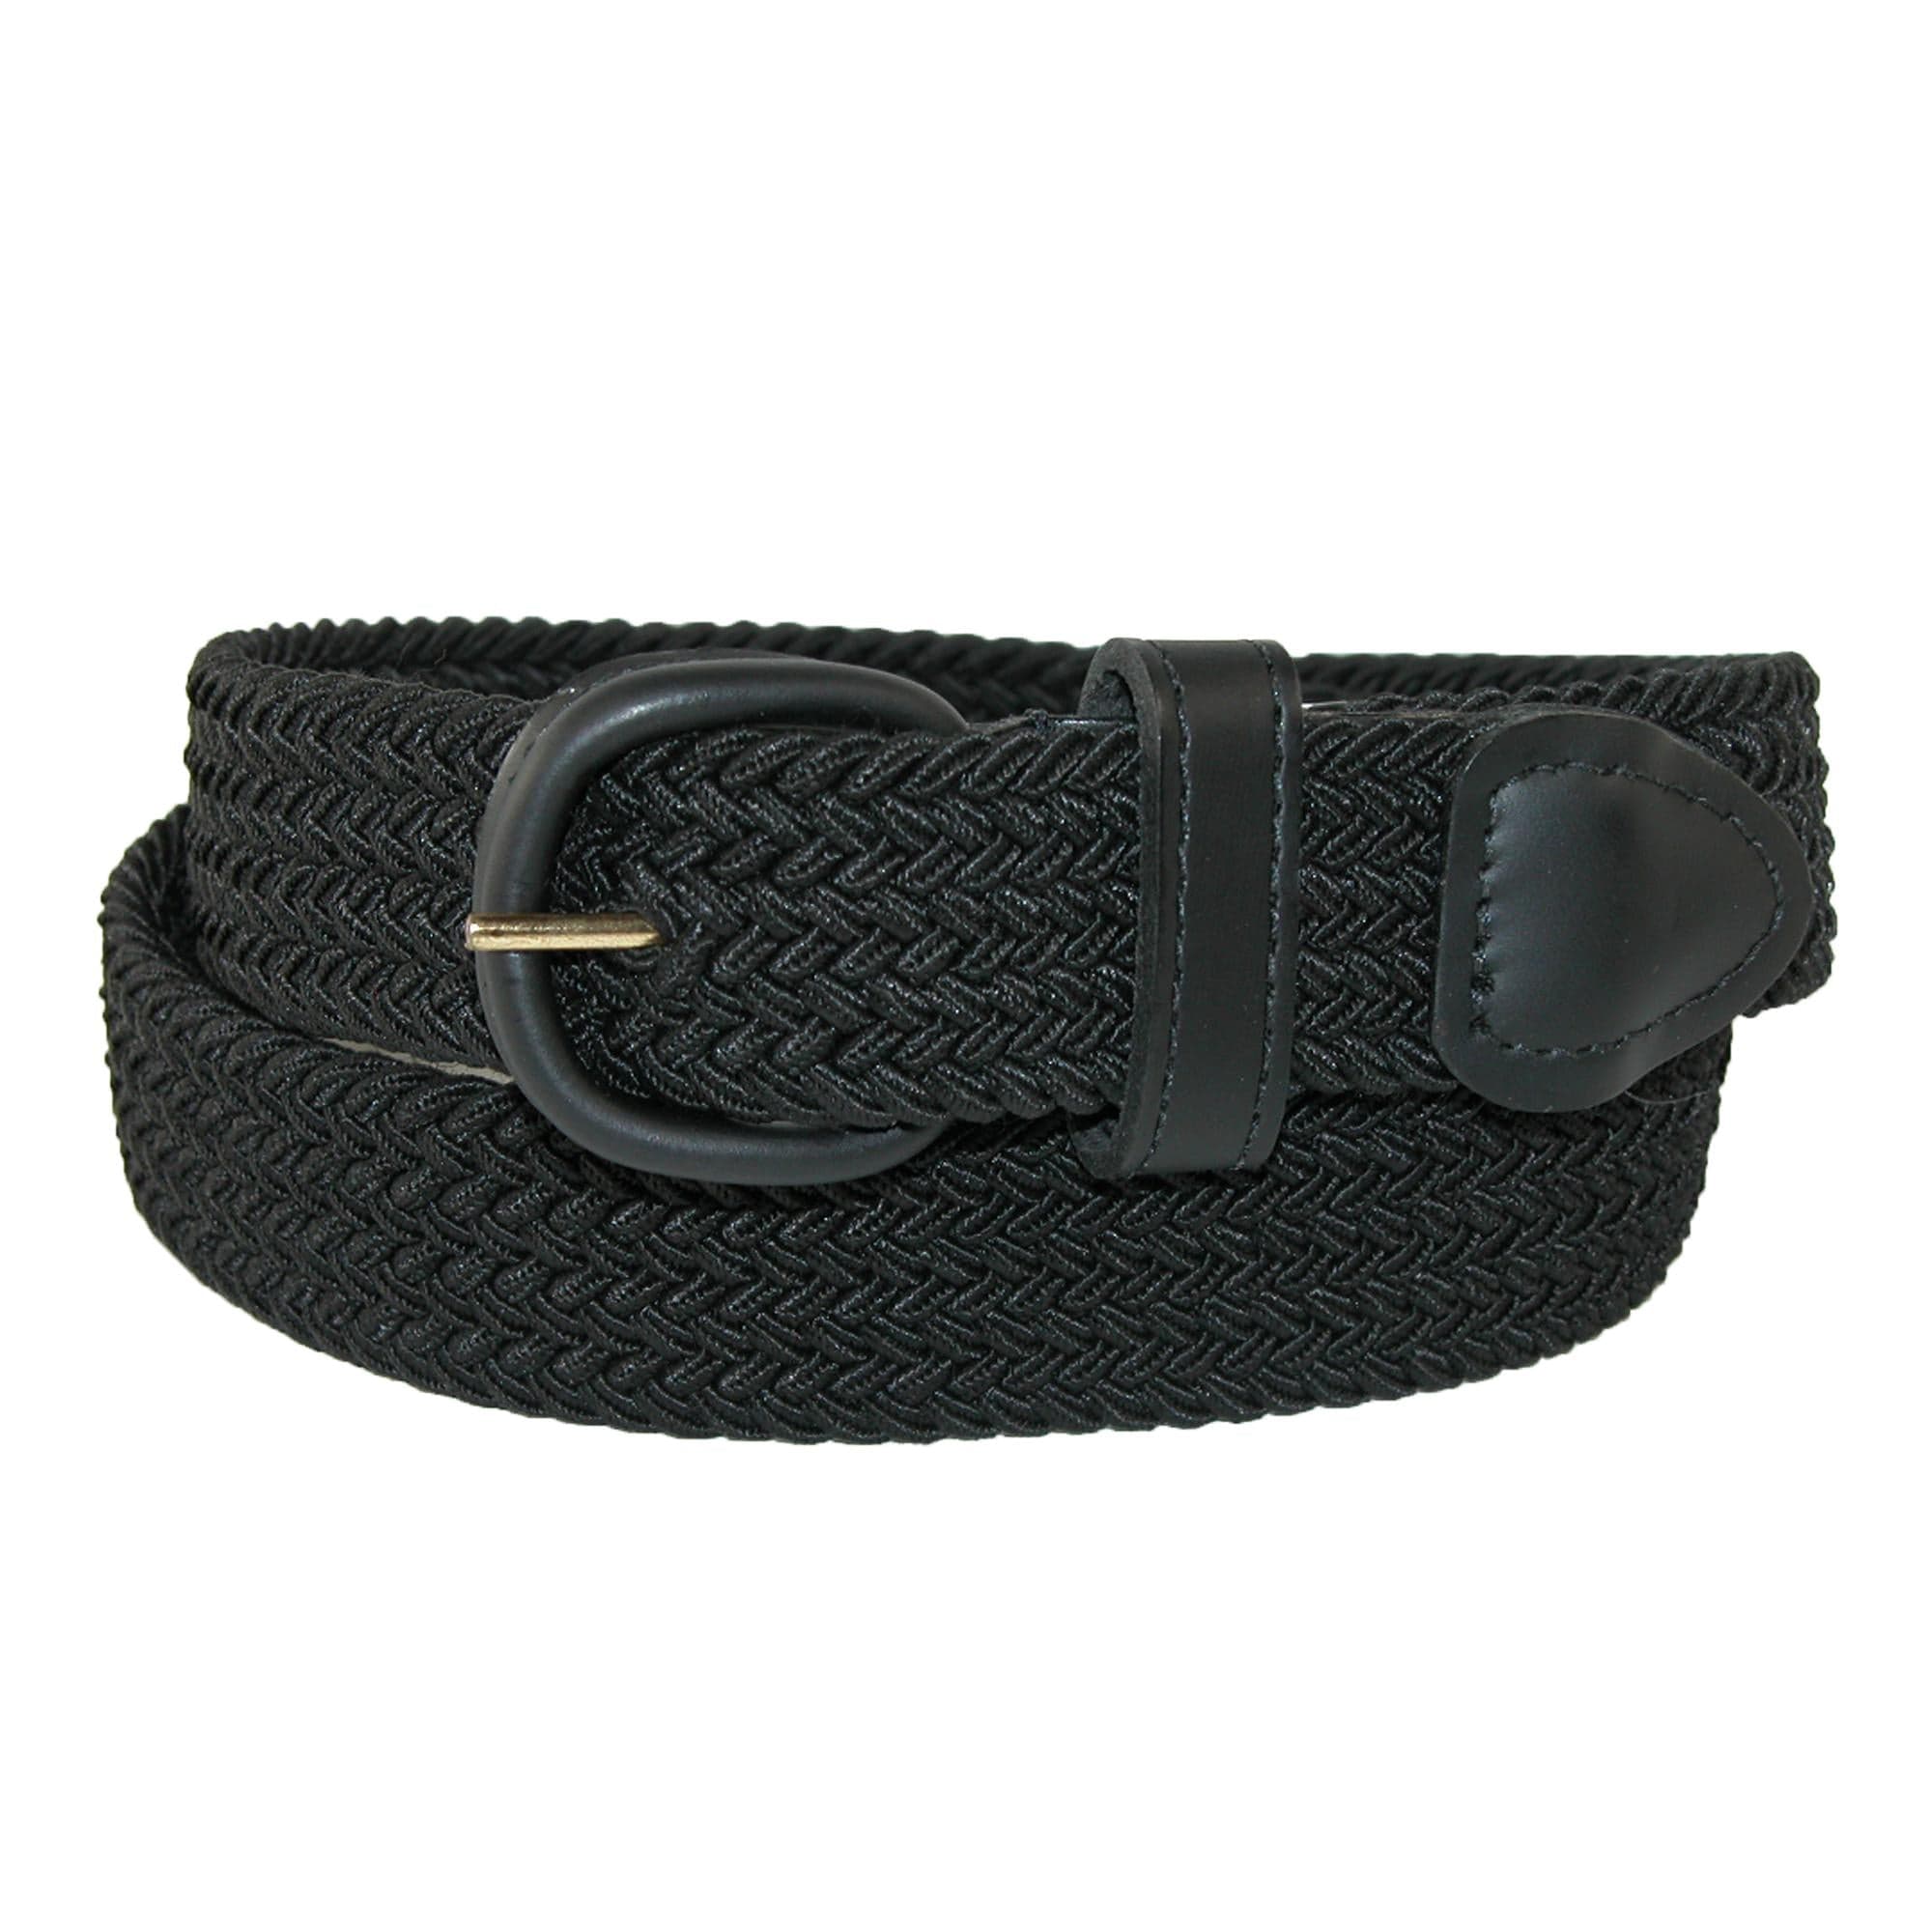 Men's Elastic Braided Belt with Covered Buckle by Hickory Creek ...